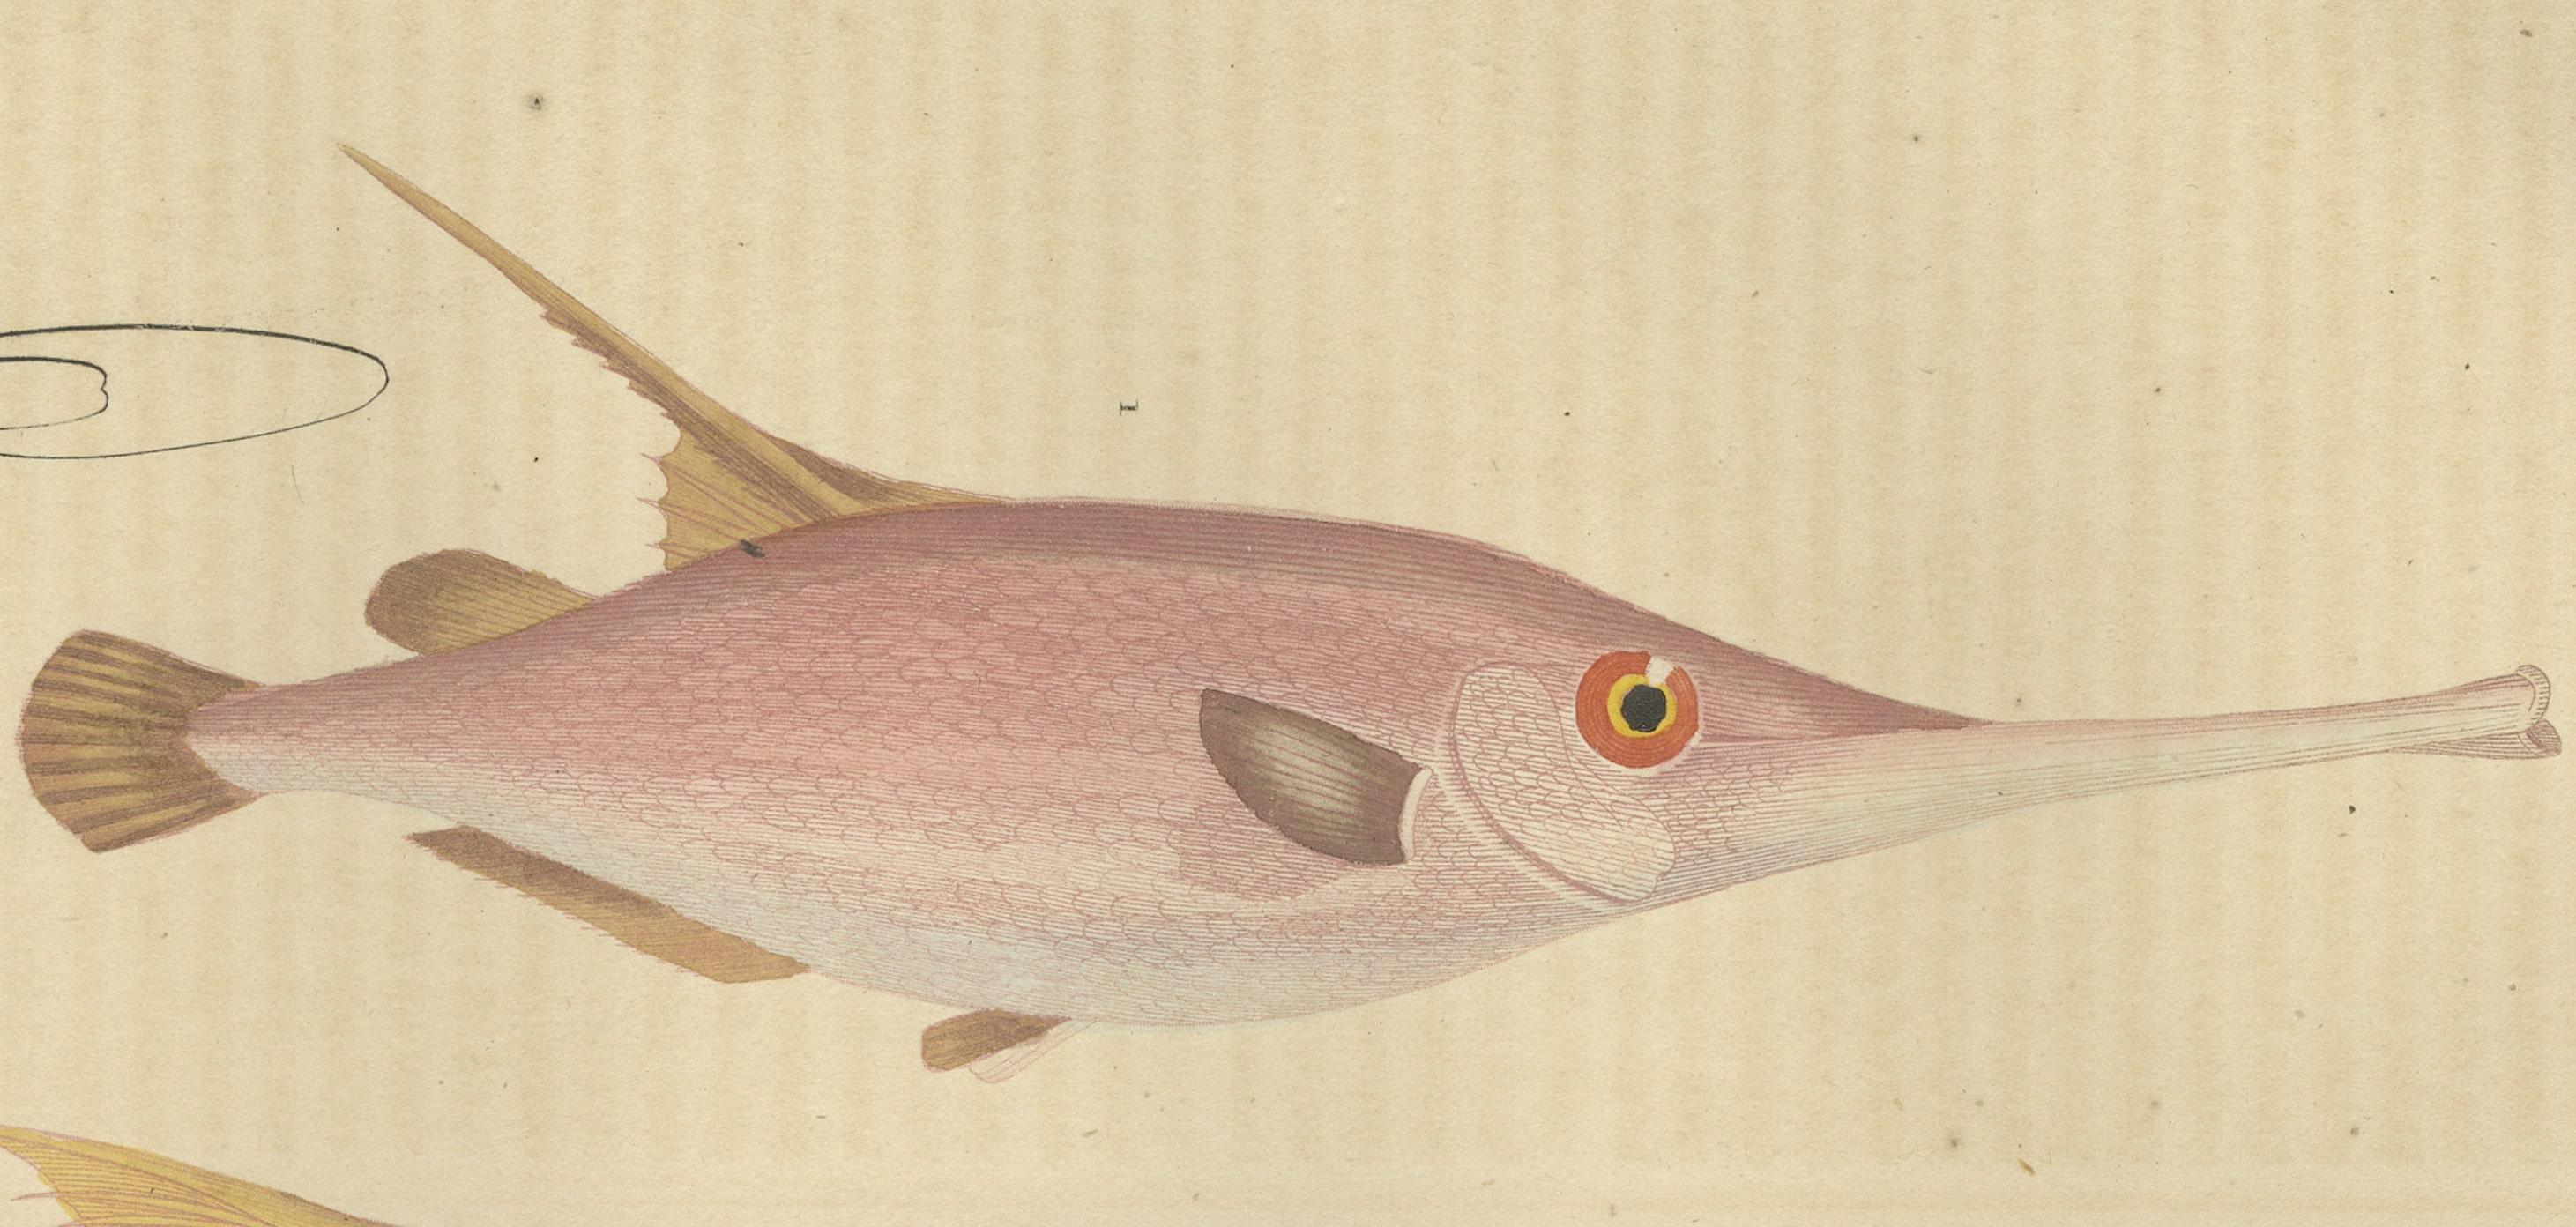 The image is an antique engraving featuring two species of marine fish: Centriscus scolopax and Centriscus scutatus, also known as the Razorfish and Shrimpfish, respectively.

On the left, the Centriscus scolopax is depicted with its slender and